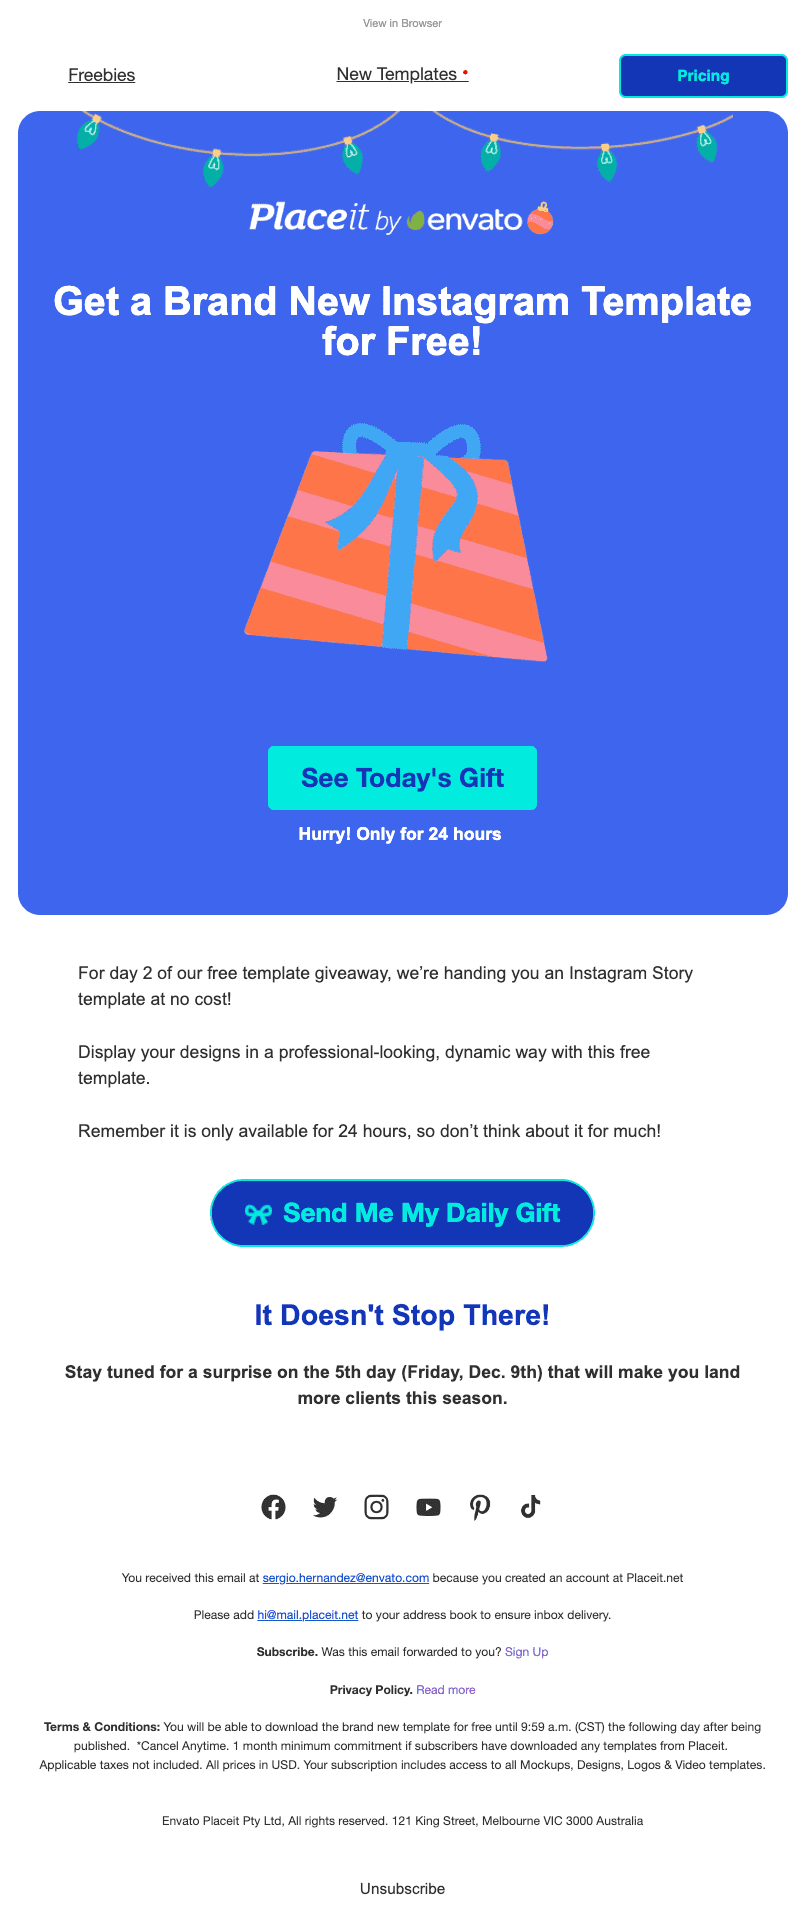 Email from the holiday campaign